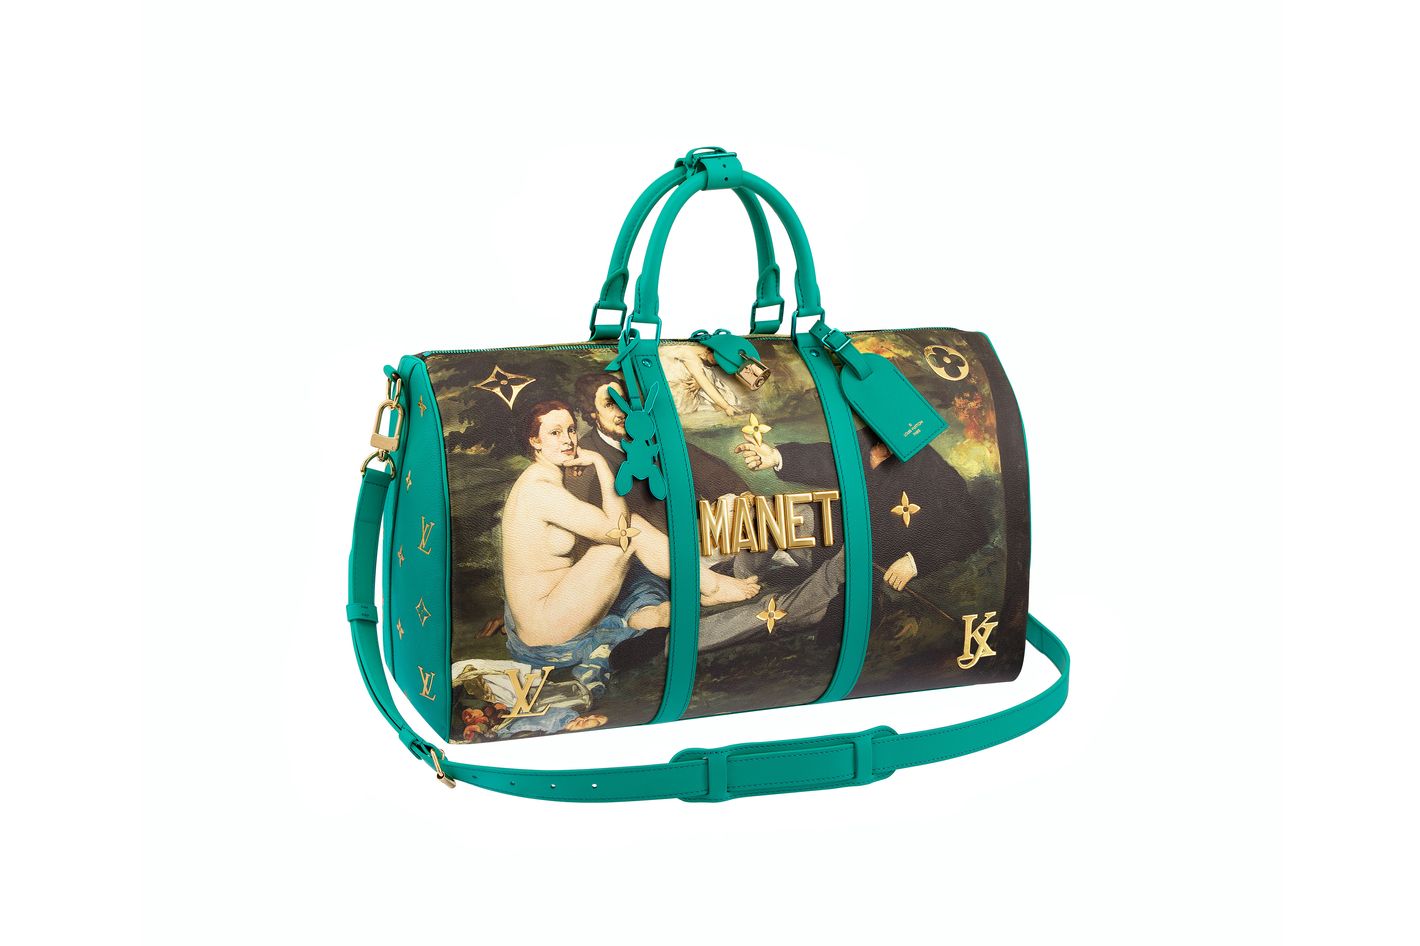 Louis Vuitton Drops Its Second Collection with Jeff Koons